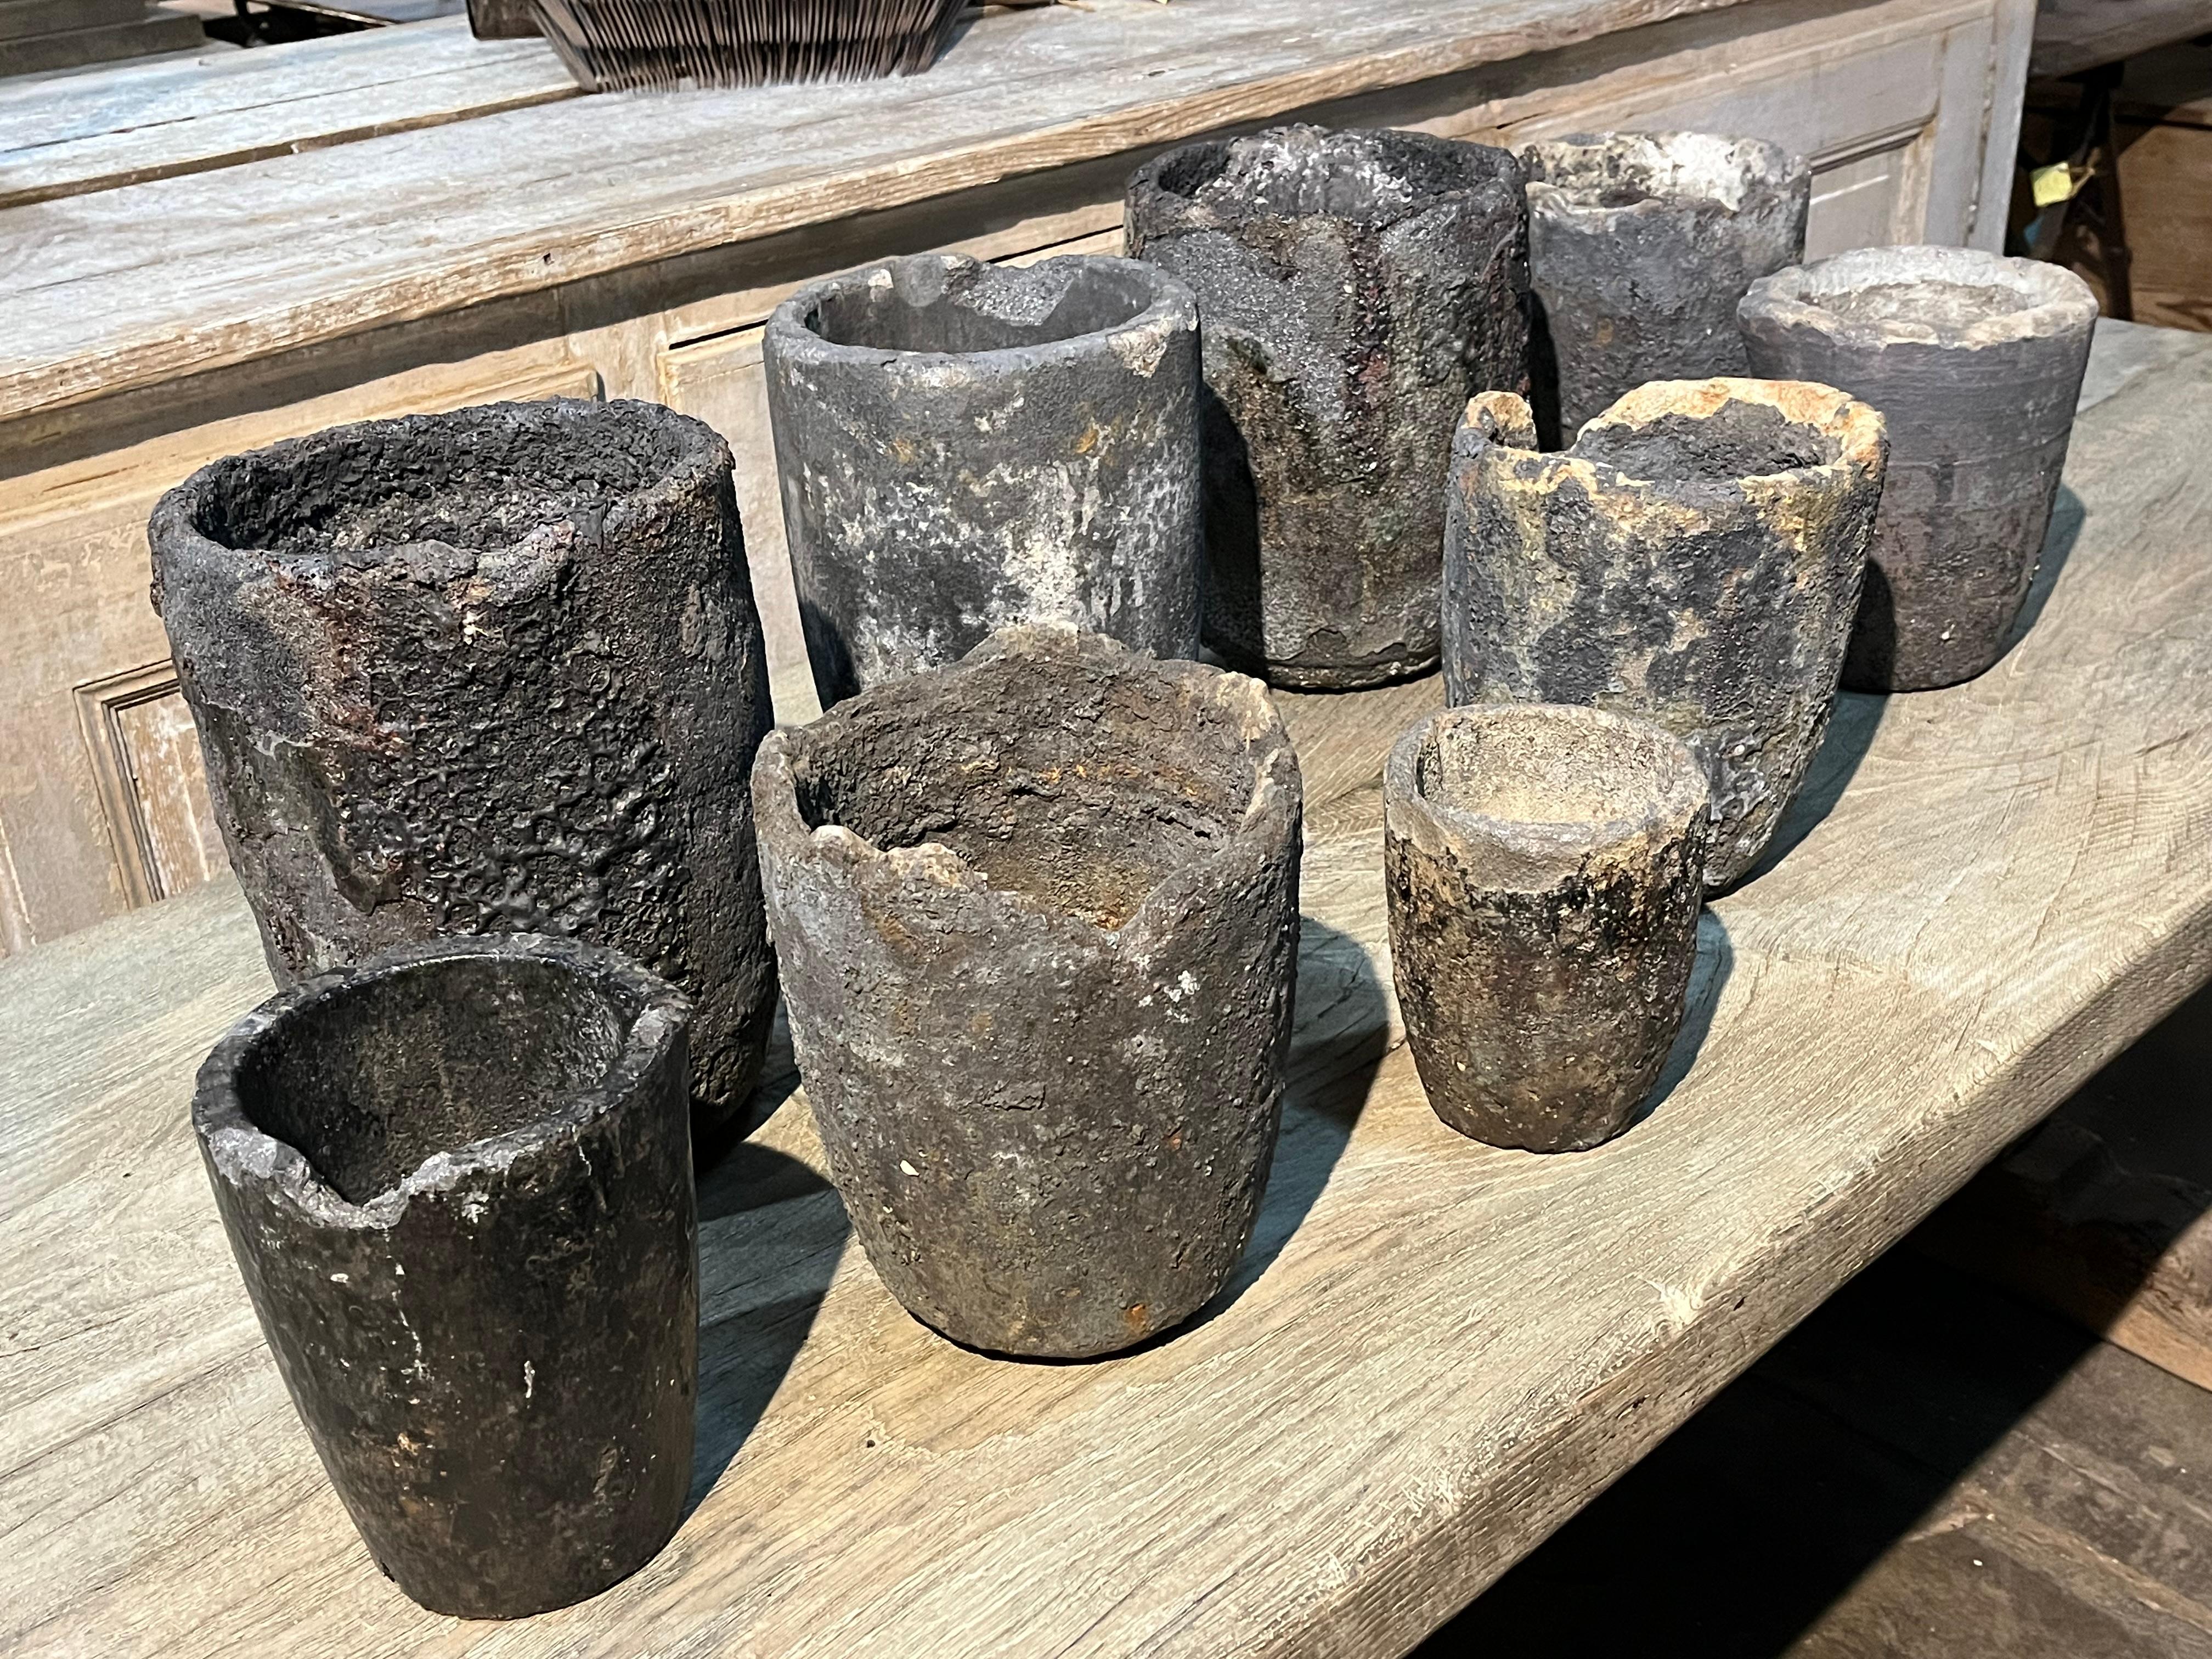 A terrific set of 9 early 20th century Creuzet - foundry Pots from France of unusually small scale. Fabulous patina. Fabulous as jardinieres or planters. Perfect for any interior of garden. A Crucible was made from a lava-like Material with a much